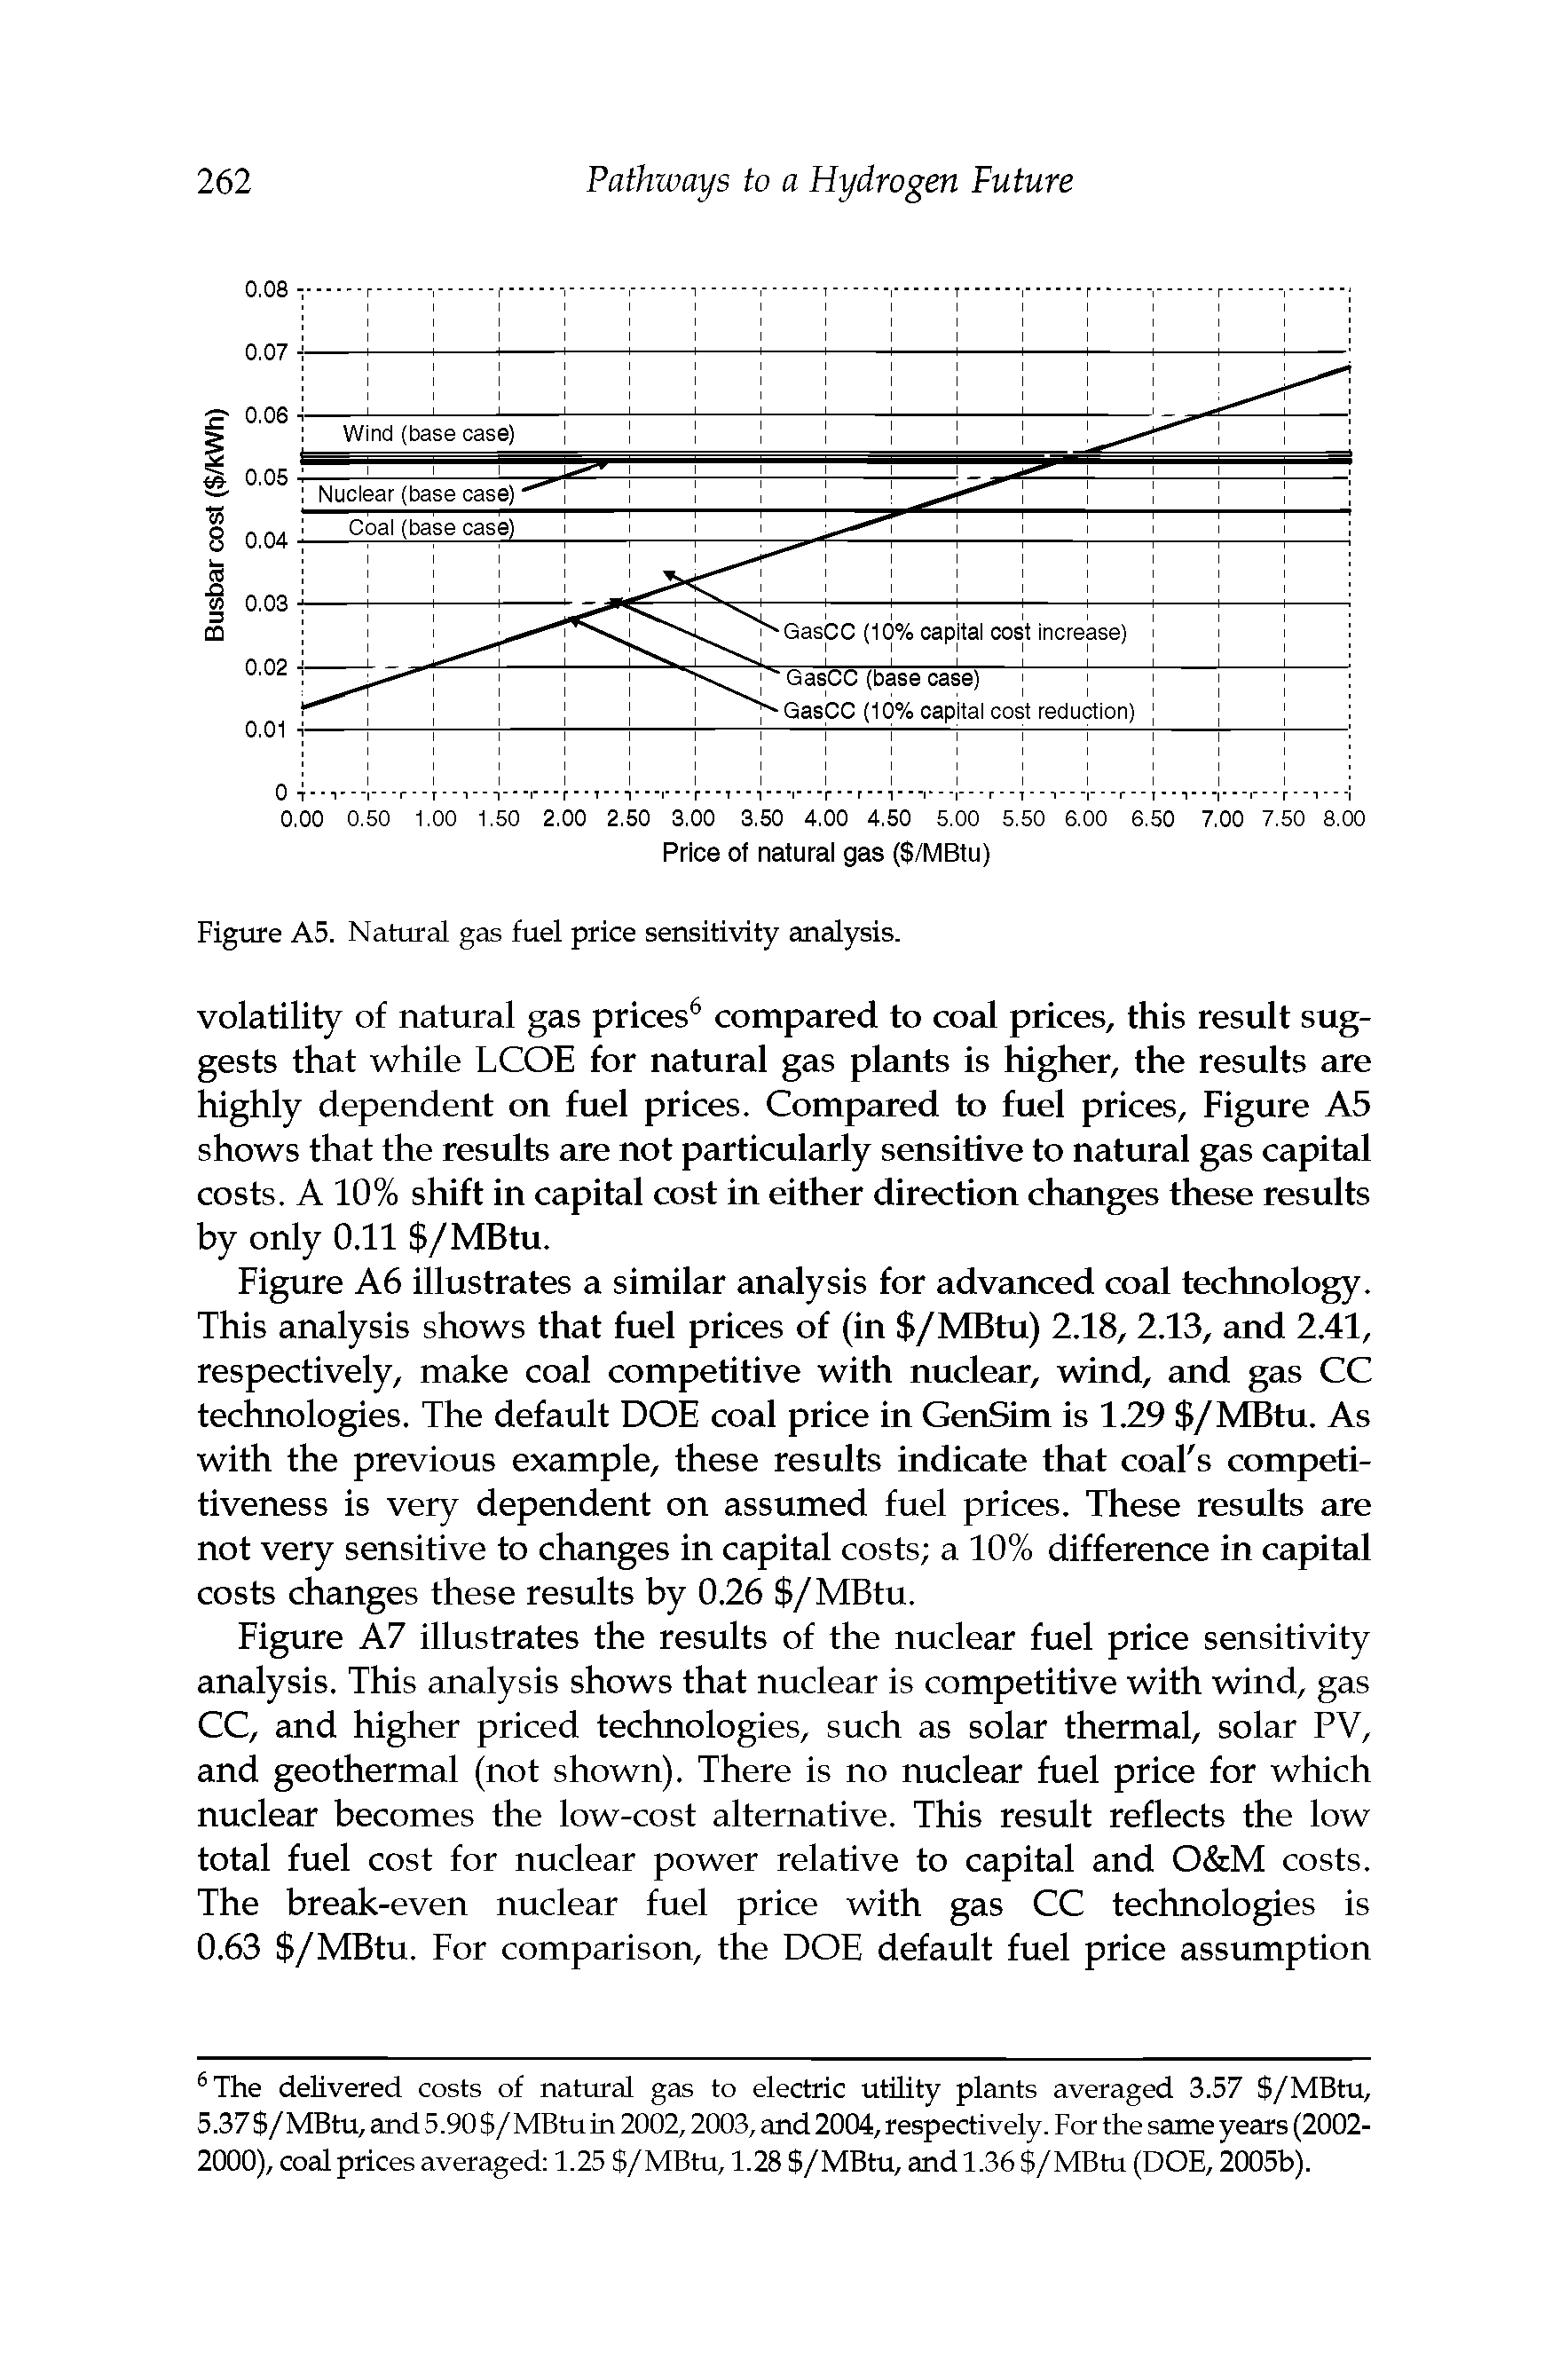 Figure A7 illustrates the results of the nuclear fuel price sensitivity analysis. This analysis shows that nuclear is competitive with wind, gas CC, and higher priced technologies, such as solar thermal, solar PV, and geothermal (not shown). There is no nuclear fuel price for which nuclear becomes the low-cost alternative. This result reflects the low total fuel cost for nuclear power relative to capital and O M costs. The break-even nuclear fuel price with gas CC technologies is 0.63 /MBtu. For comparison, the DOE default fuel price assumption...